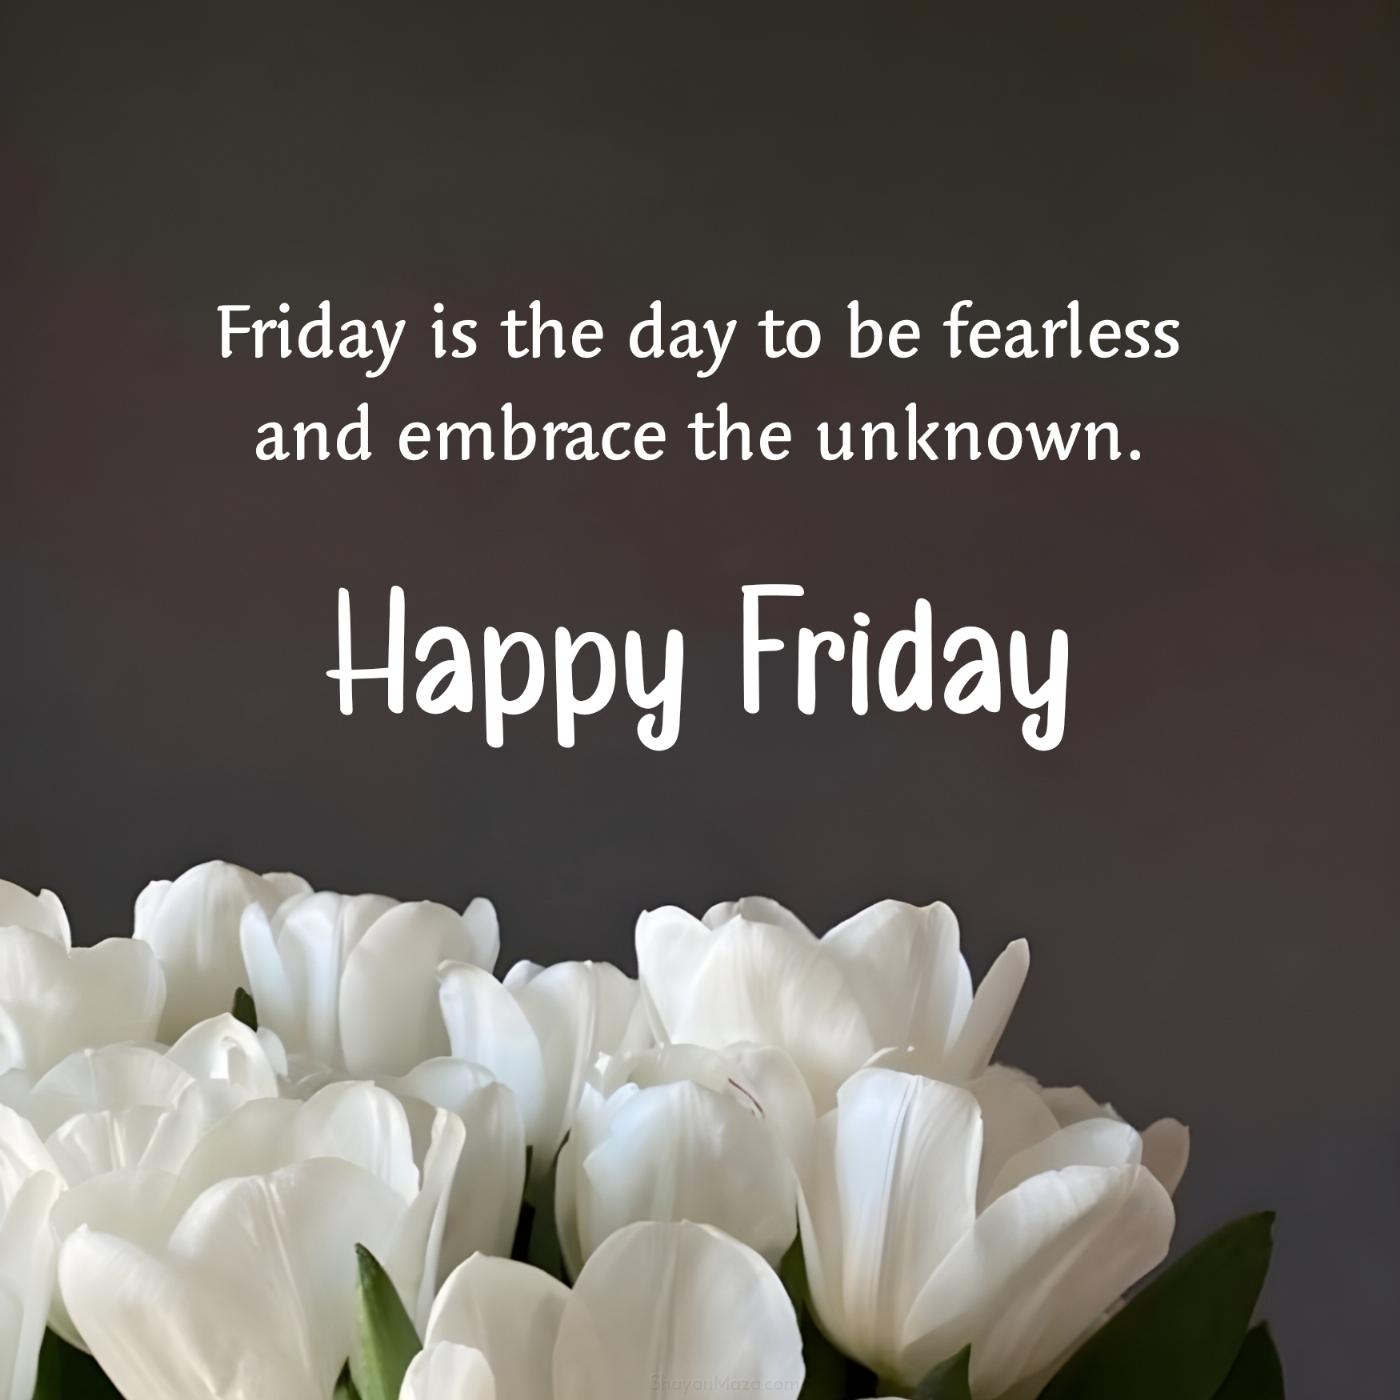 Friday is the day to be fearless and embrace the unknown